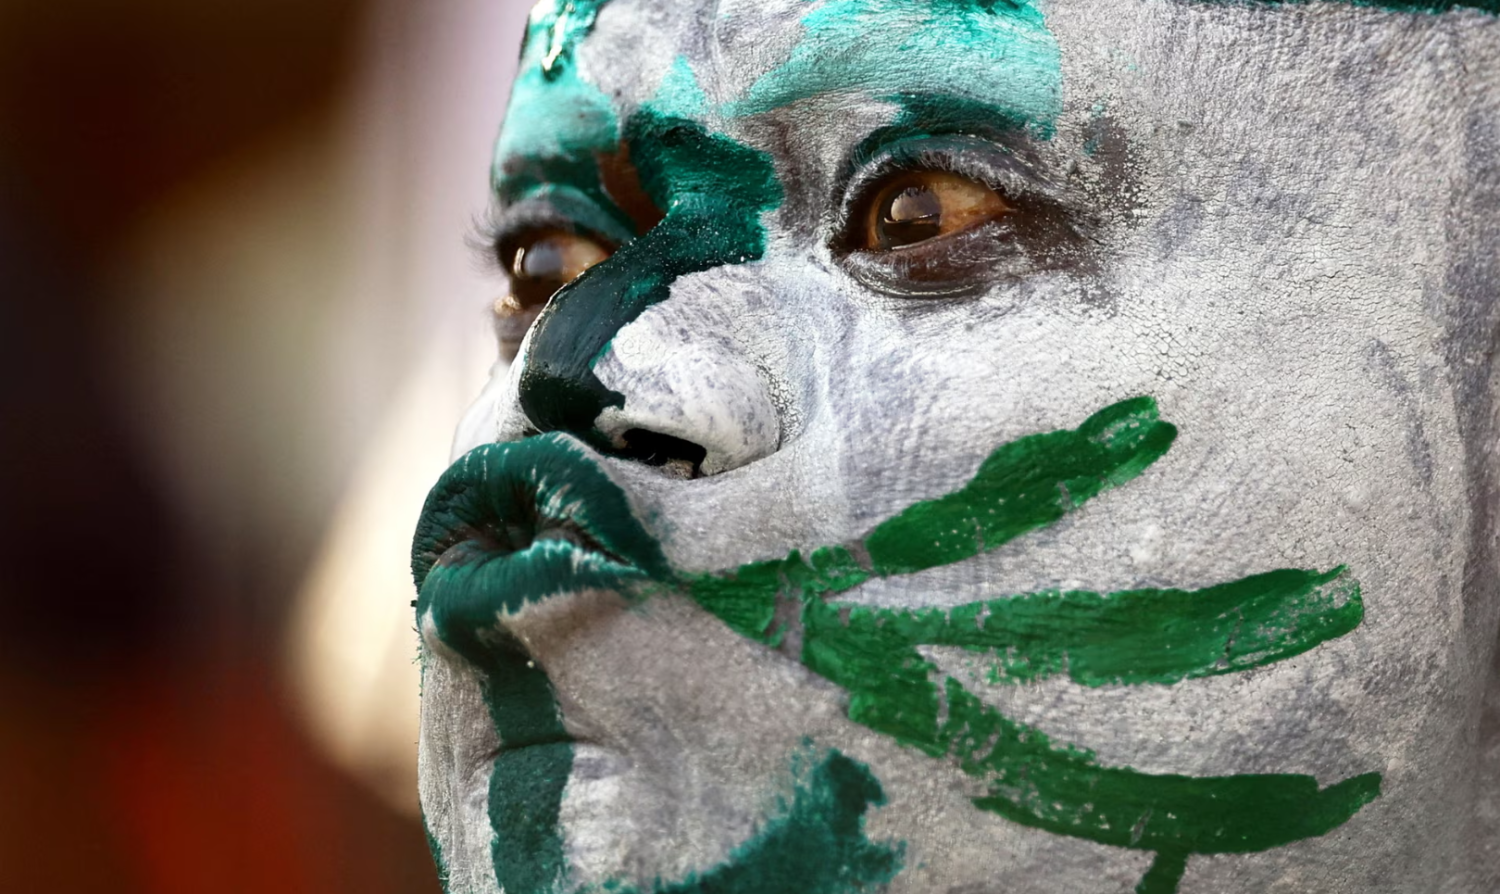 Big powers Ivory Coast and Nigeria collide as football in Africa takes giant steps